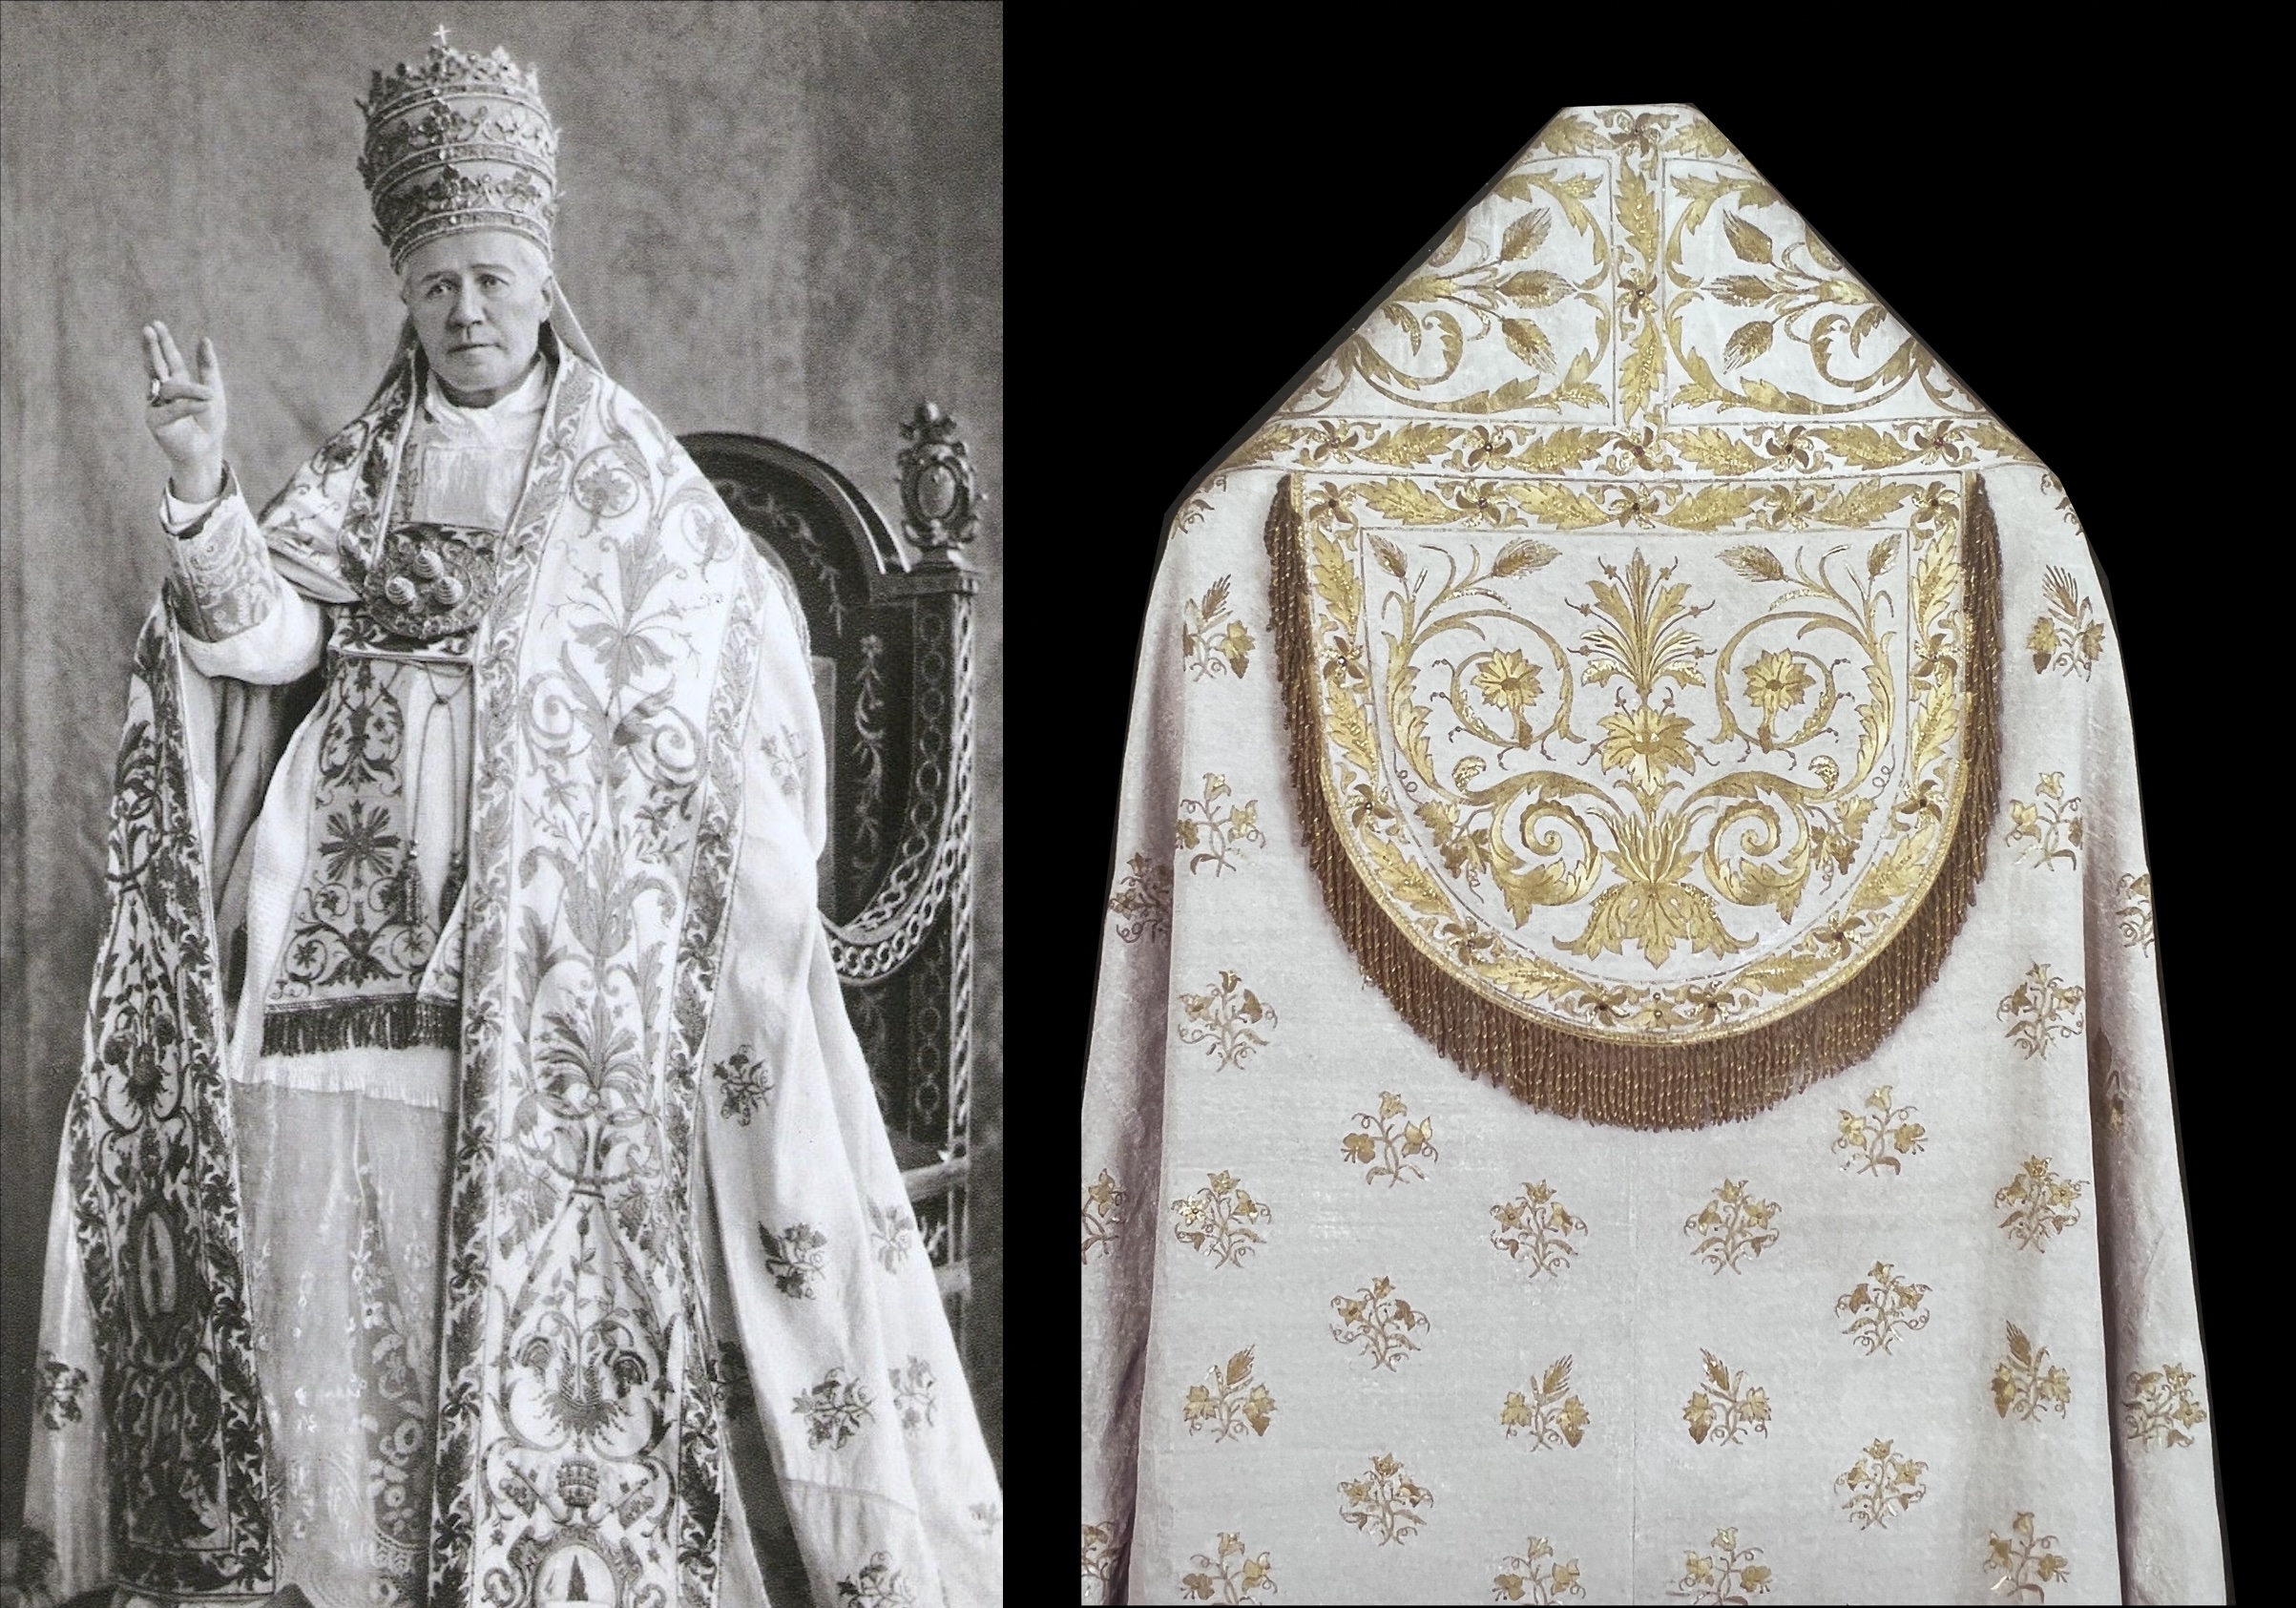 Alle slags kant aborre A Closer Look at the Leonine Mantum Shown in This Famous Photographic  Portrait of Pope St. Pius X ~ Liturgical Arts Journal